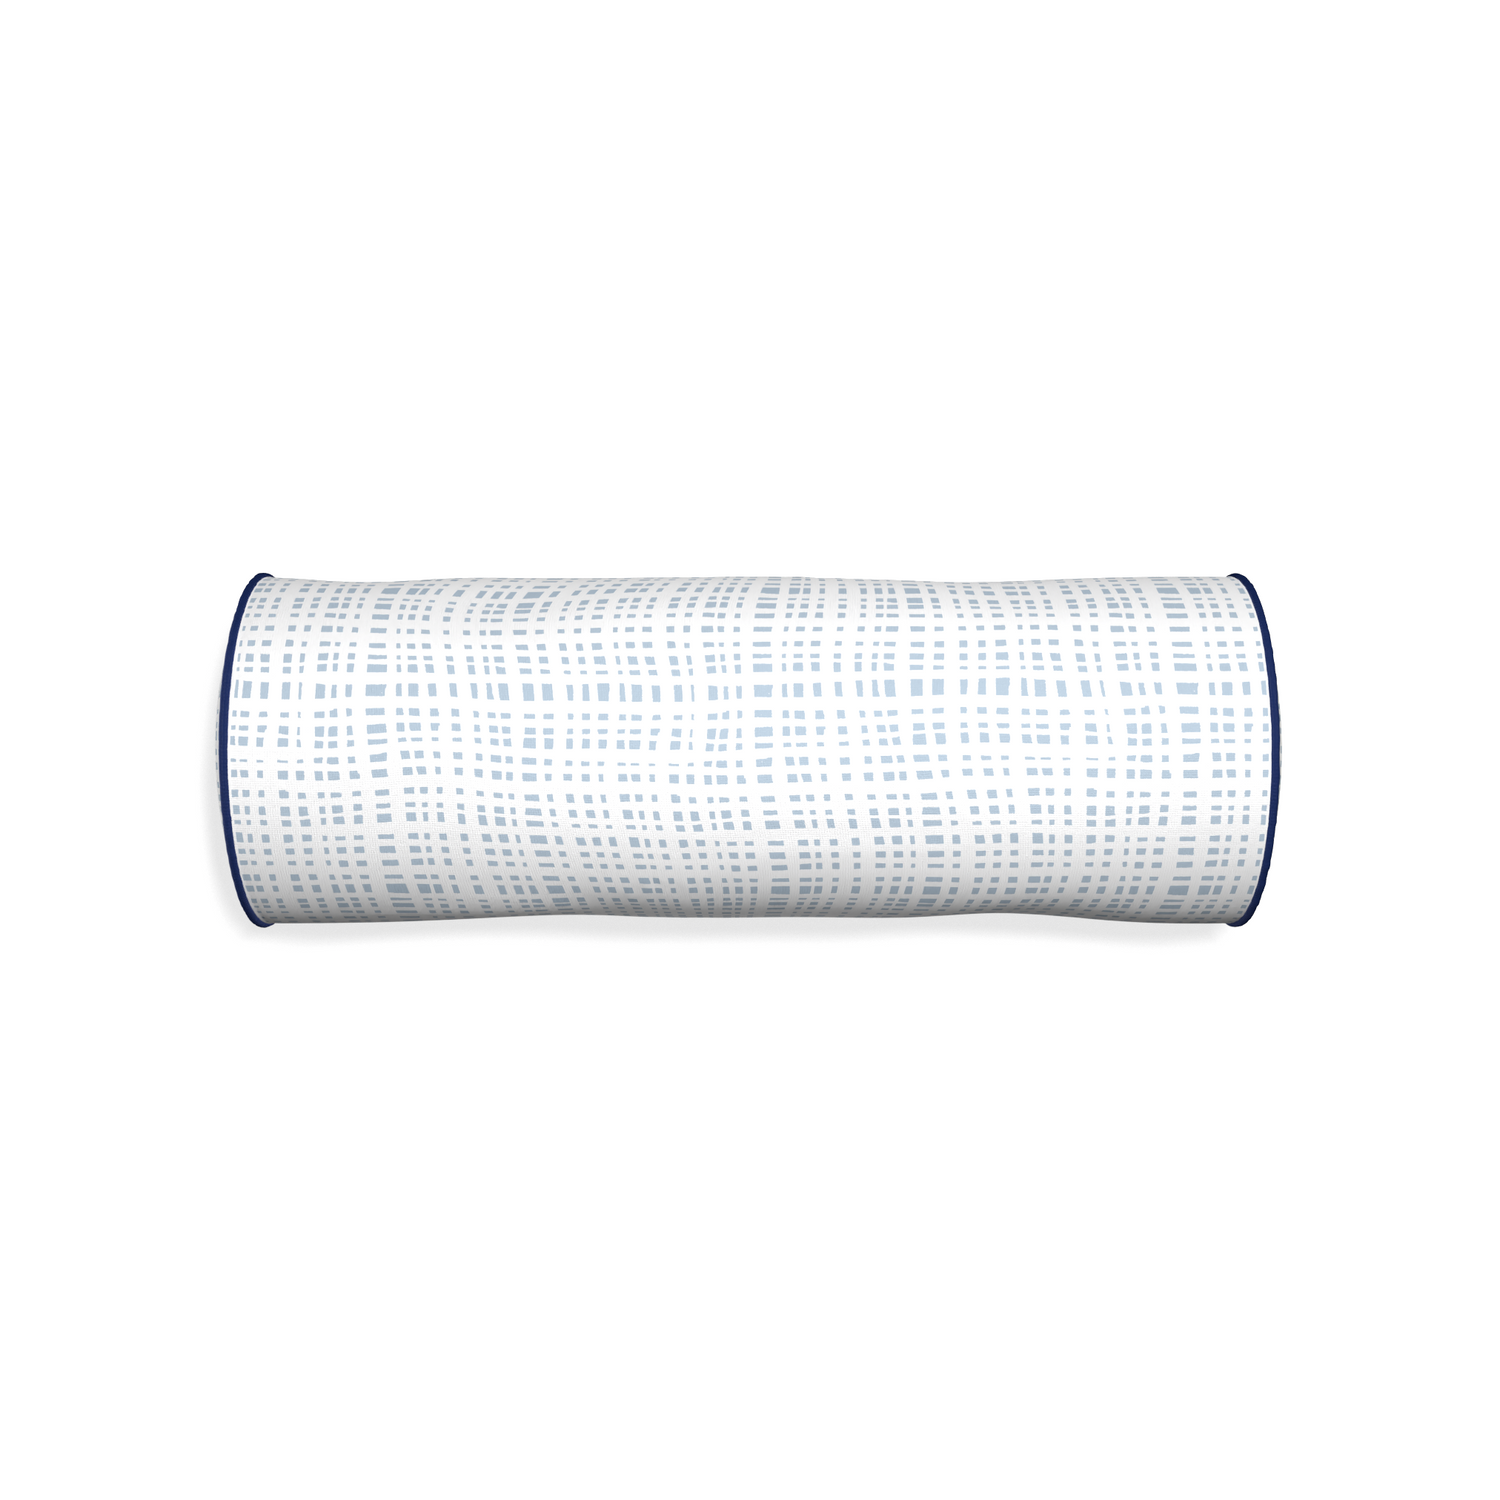 Bolster ginger custom plaid sky bluepillow with midnight piping on white background